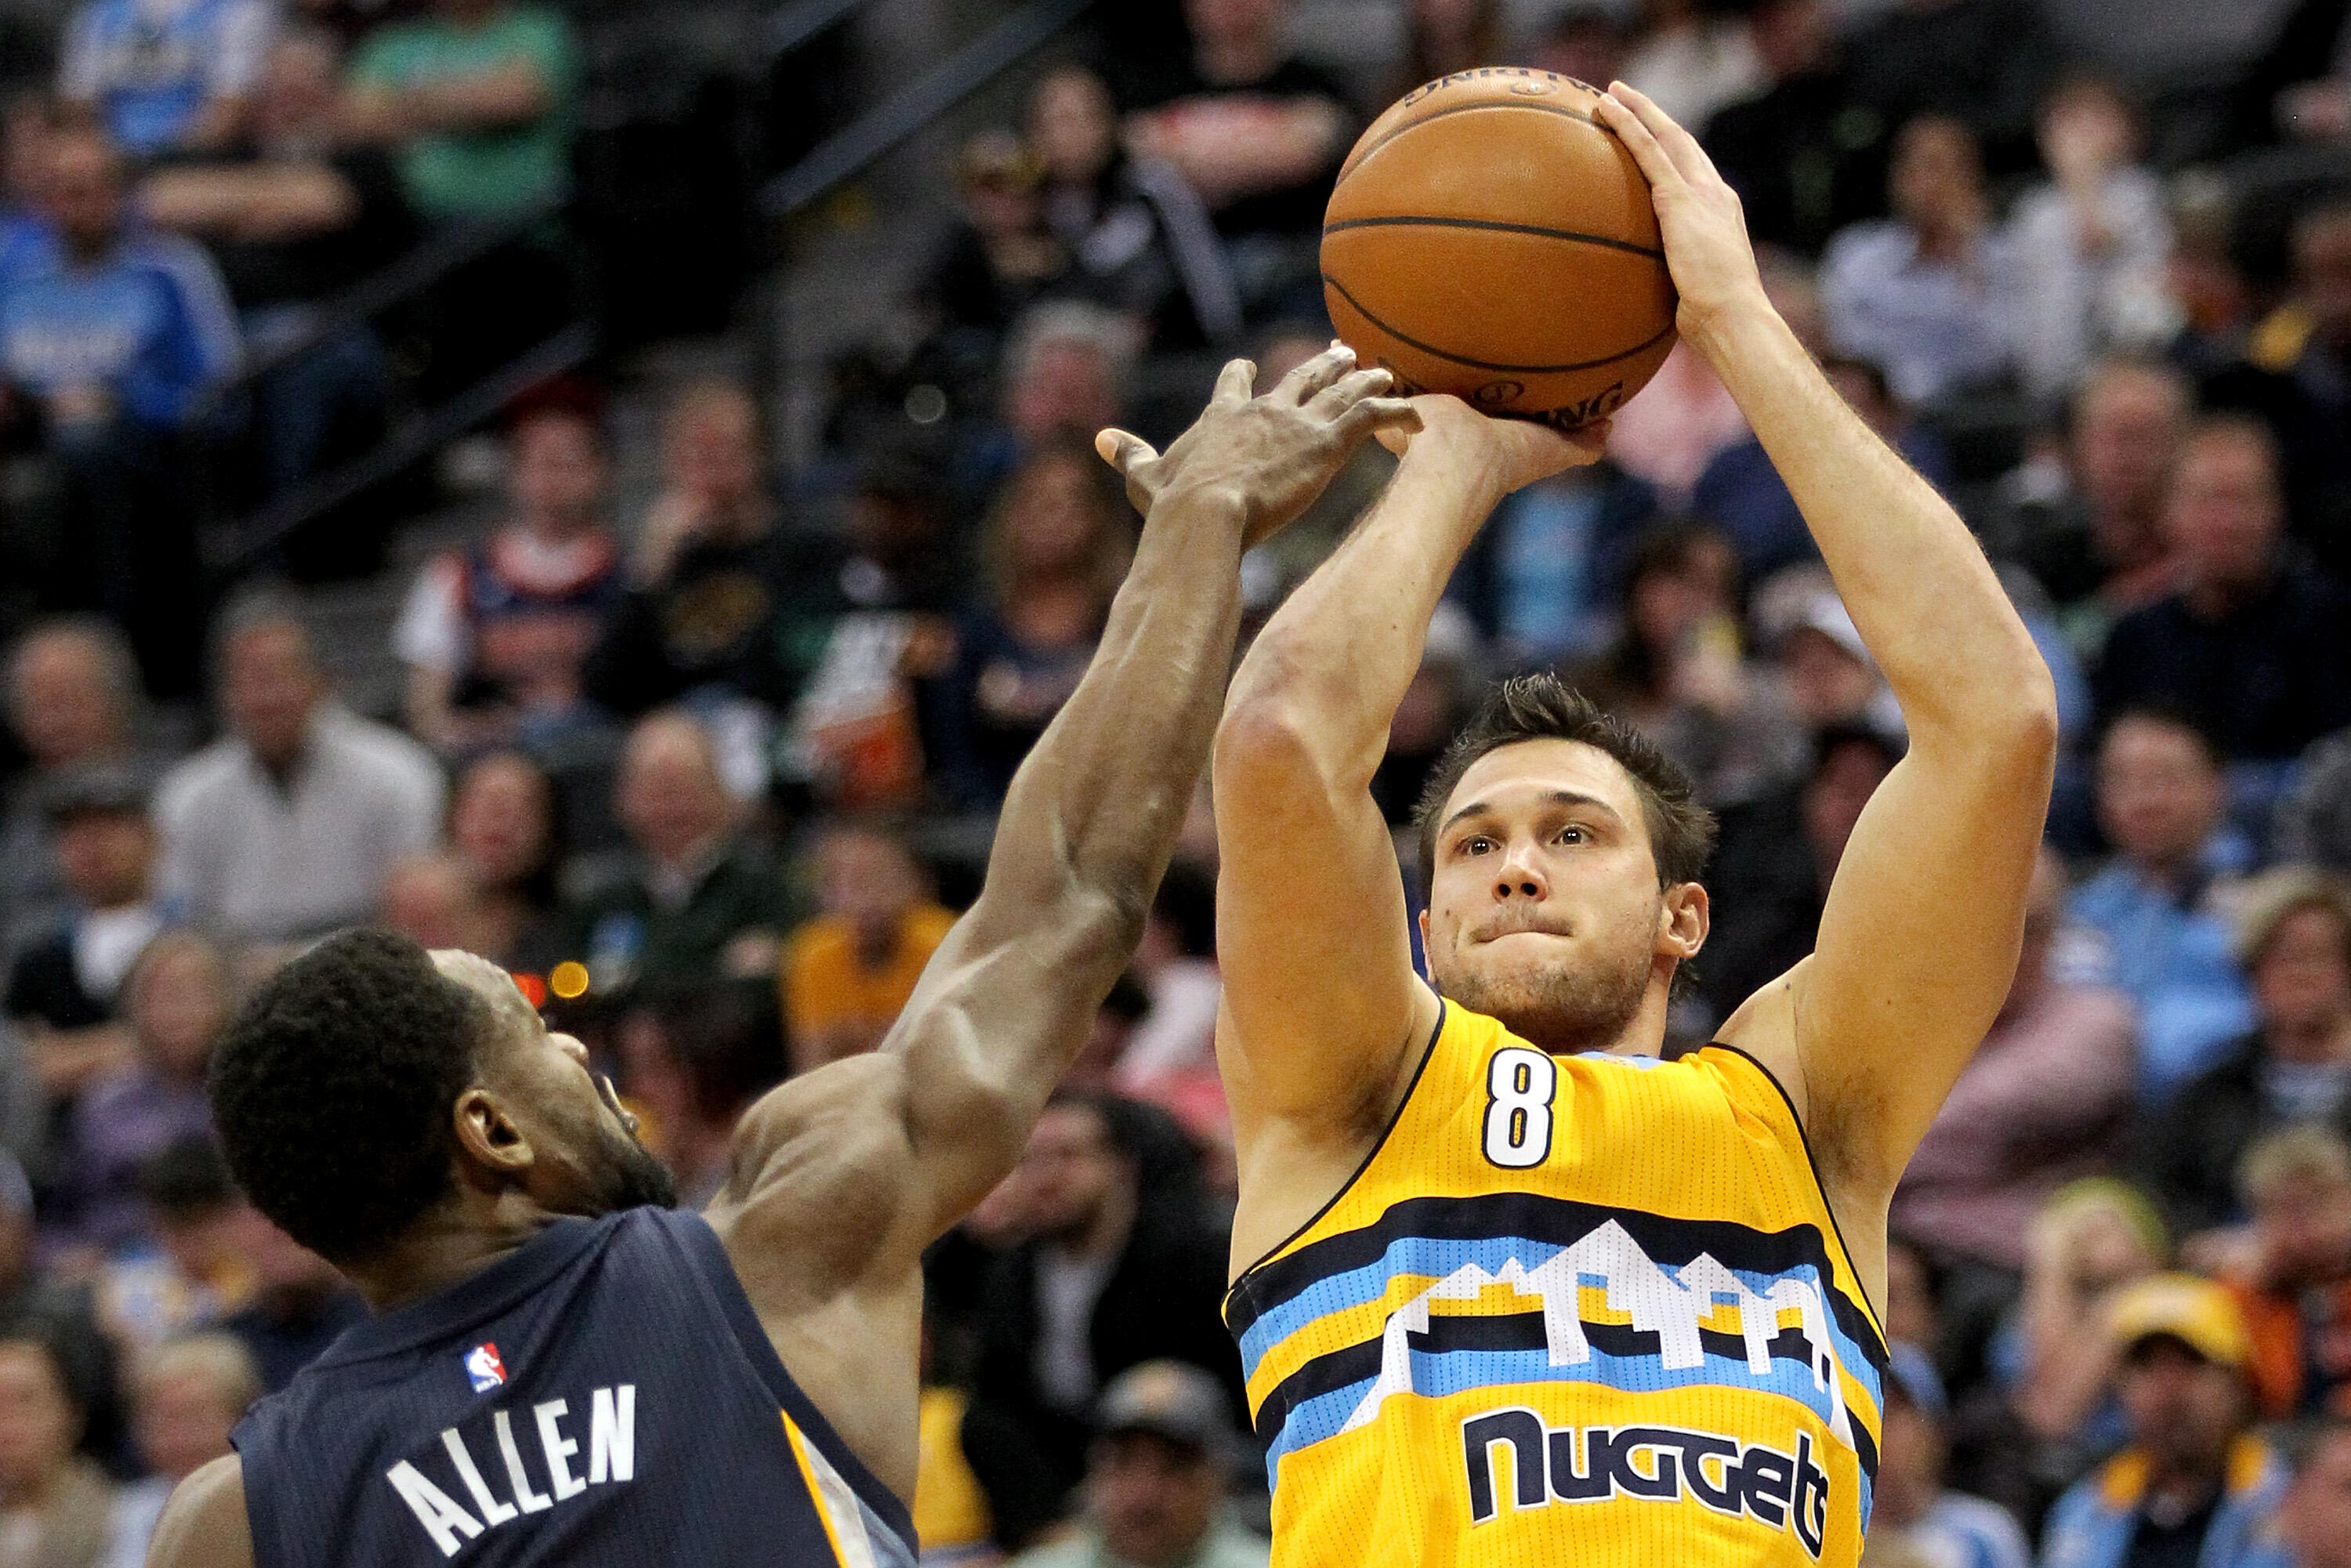 DENVER, CO - FEBRUARY 26:  Danilo Gallinari #8 of the Denver Nuggets puts up a shot over Tony Allen #9 of the Memphis Grizzlies at the Pepsi Center on February 26, 2017 in Denver, Colorado. NOTE TO USER: User expressly acknowledges and agrees that , by do